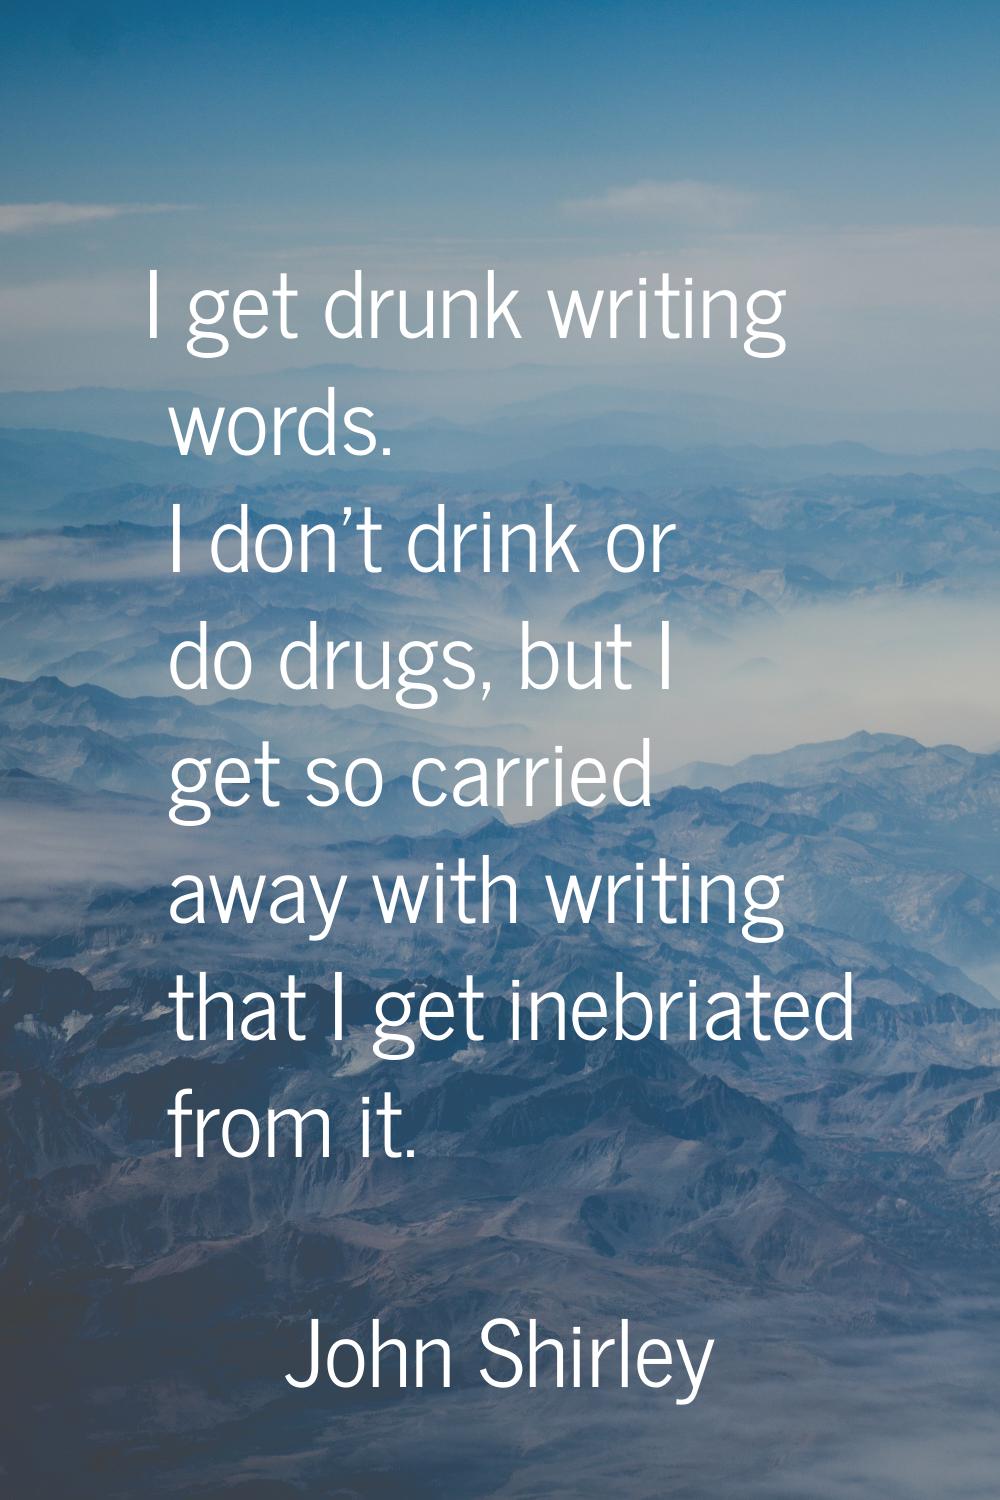 I get drunk writing words. I don't drink or do drugs, but I get so carried away with writing that I